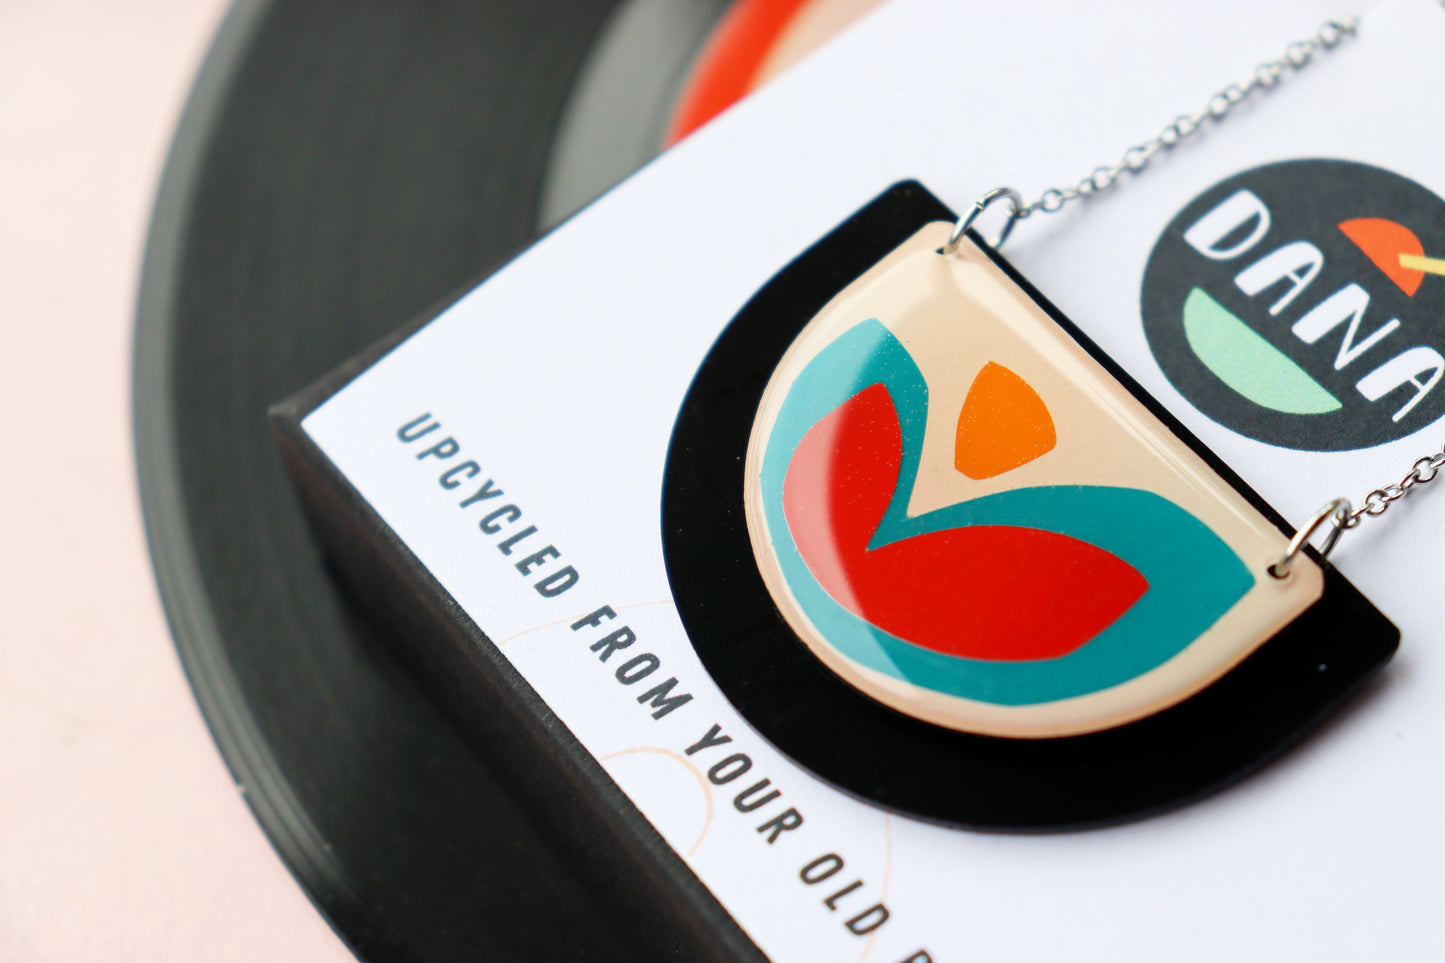 30% OFF / FLOR upcycled vinyl record necklace in red, teal and orange